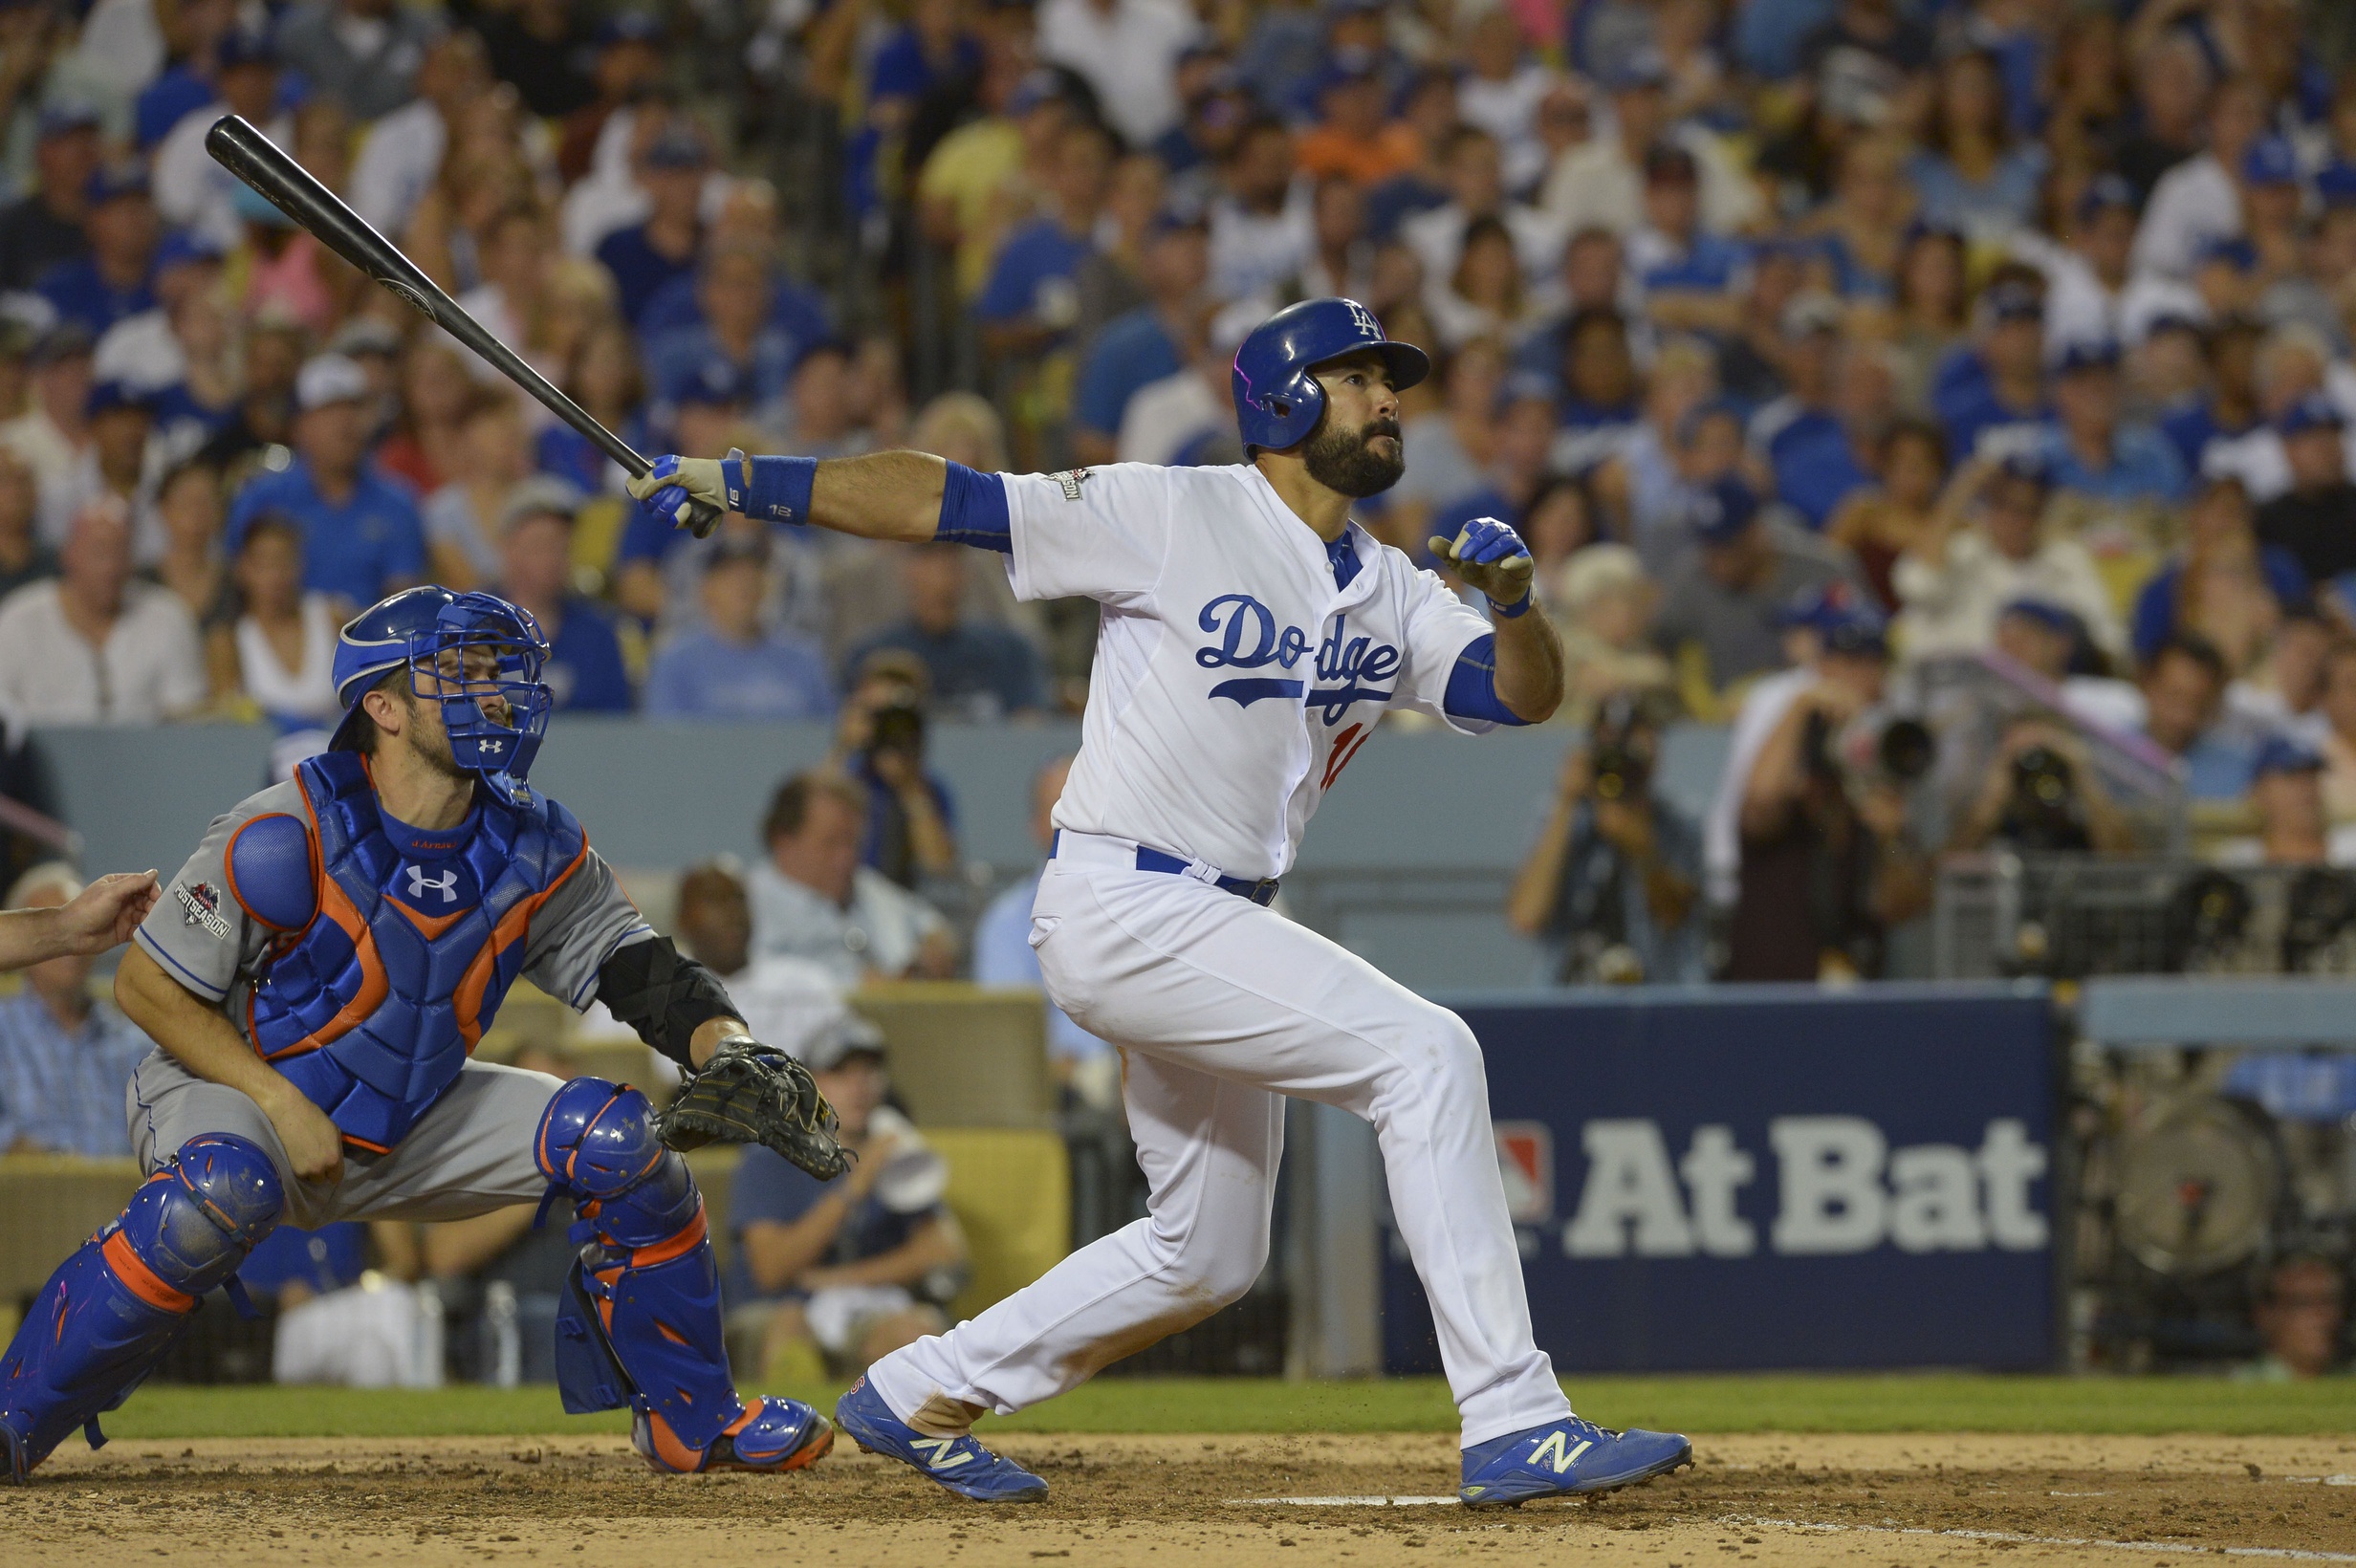 Andre Ethier enjoys connecting with Cooperstown